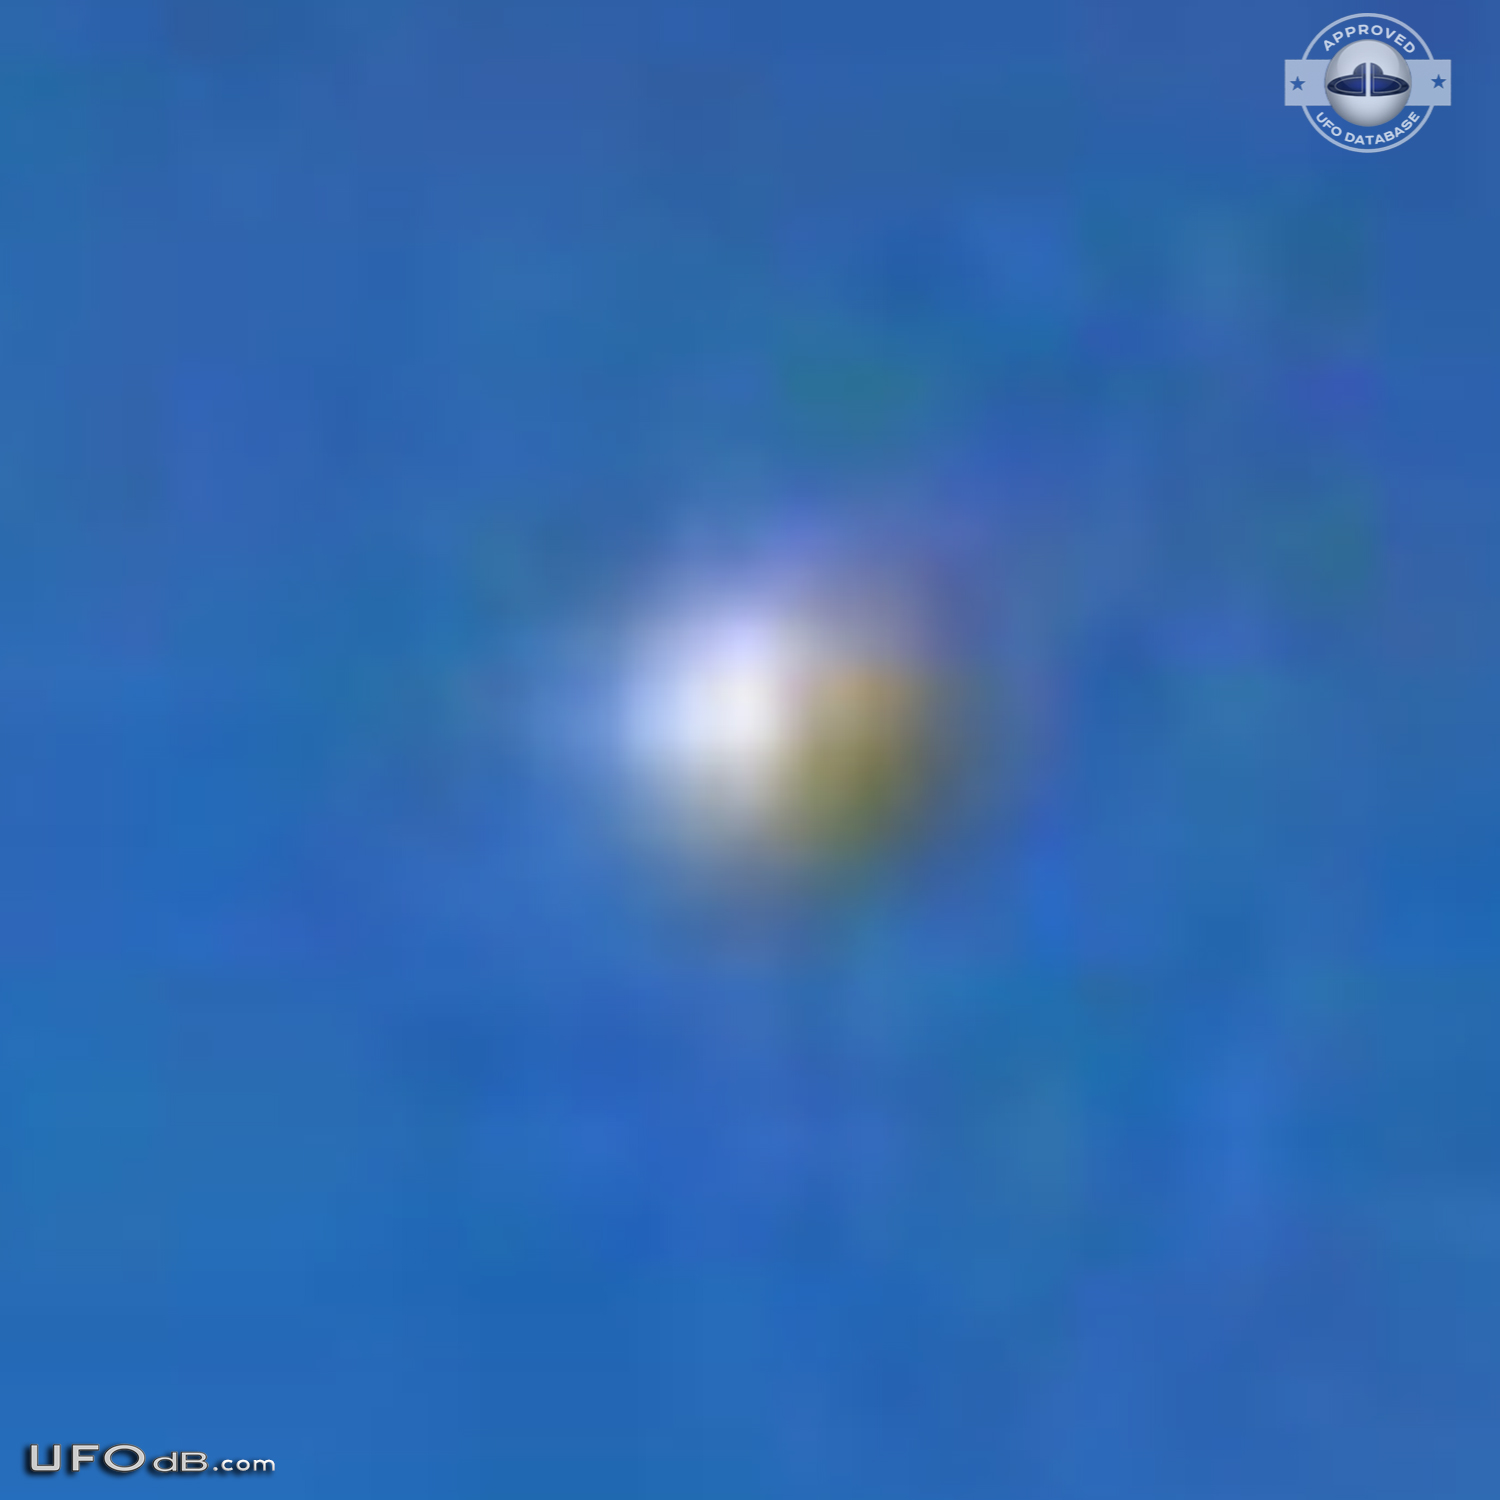 Fleet of 7 ufos changing color caught on photo over Riga, Latvia 2010 UFO Picture #405-5